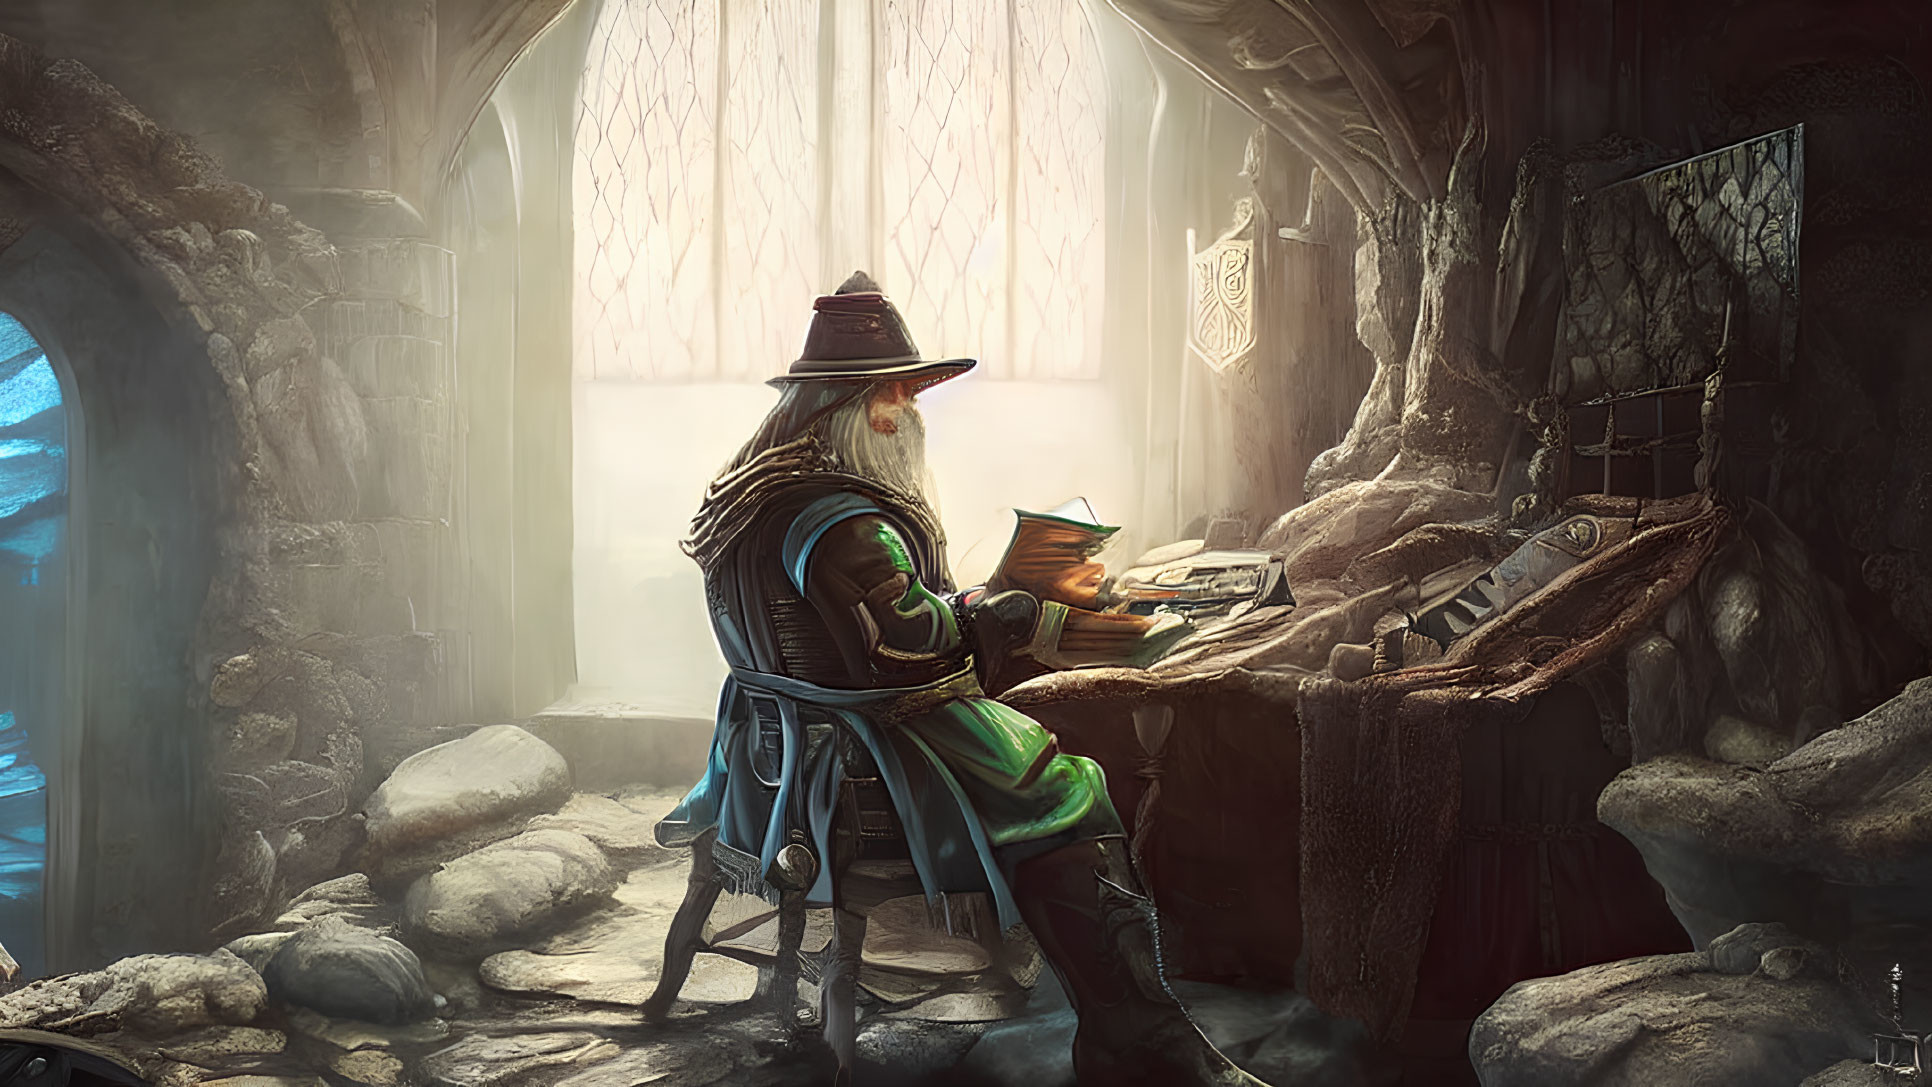 Wizard reading a tome by fireplace in stone chamber with stained-glass window